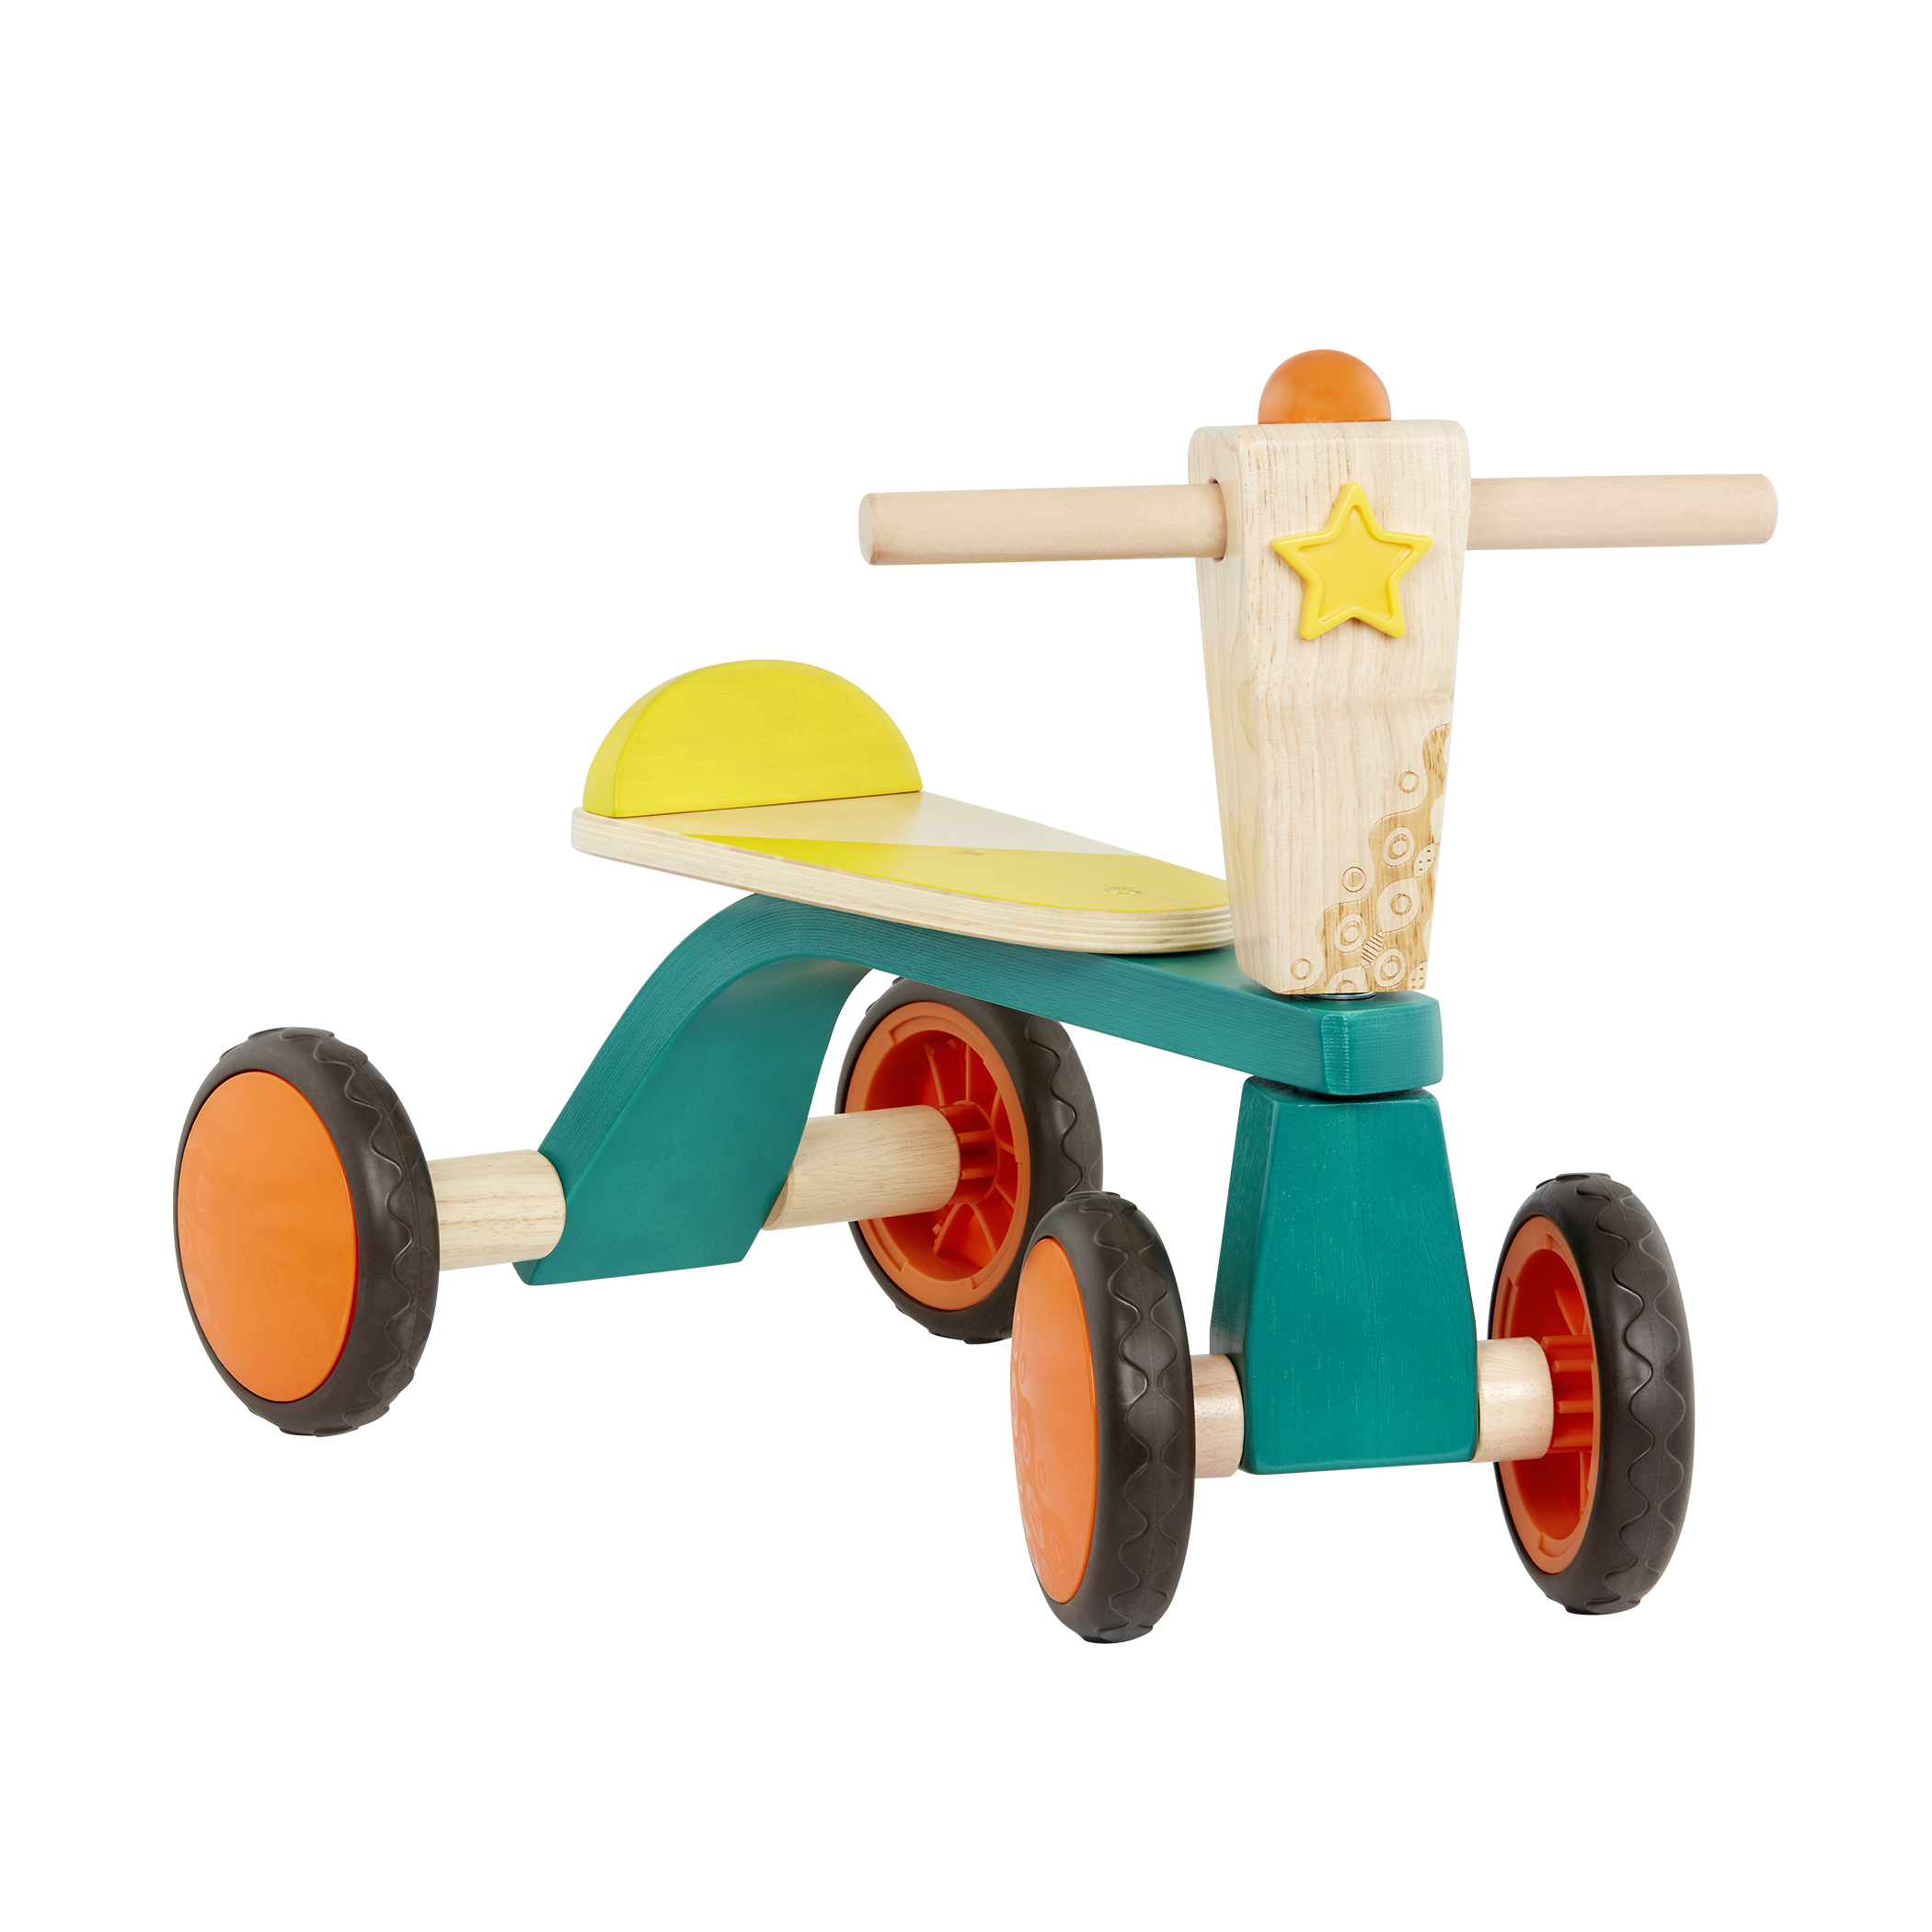 Battat B Smooth Rider Wooden Toddler Bike Tricycle Trike 18m for sale online 